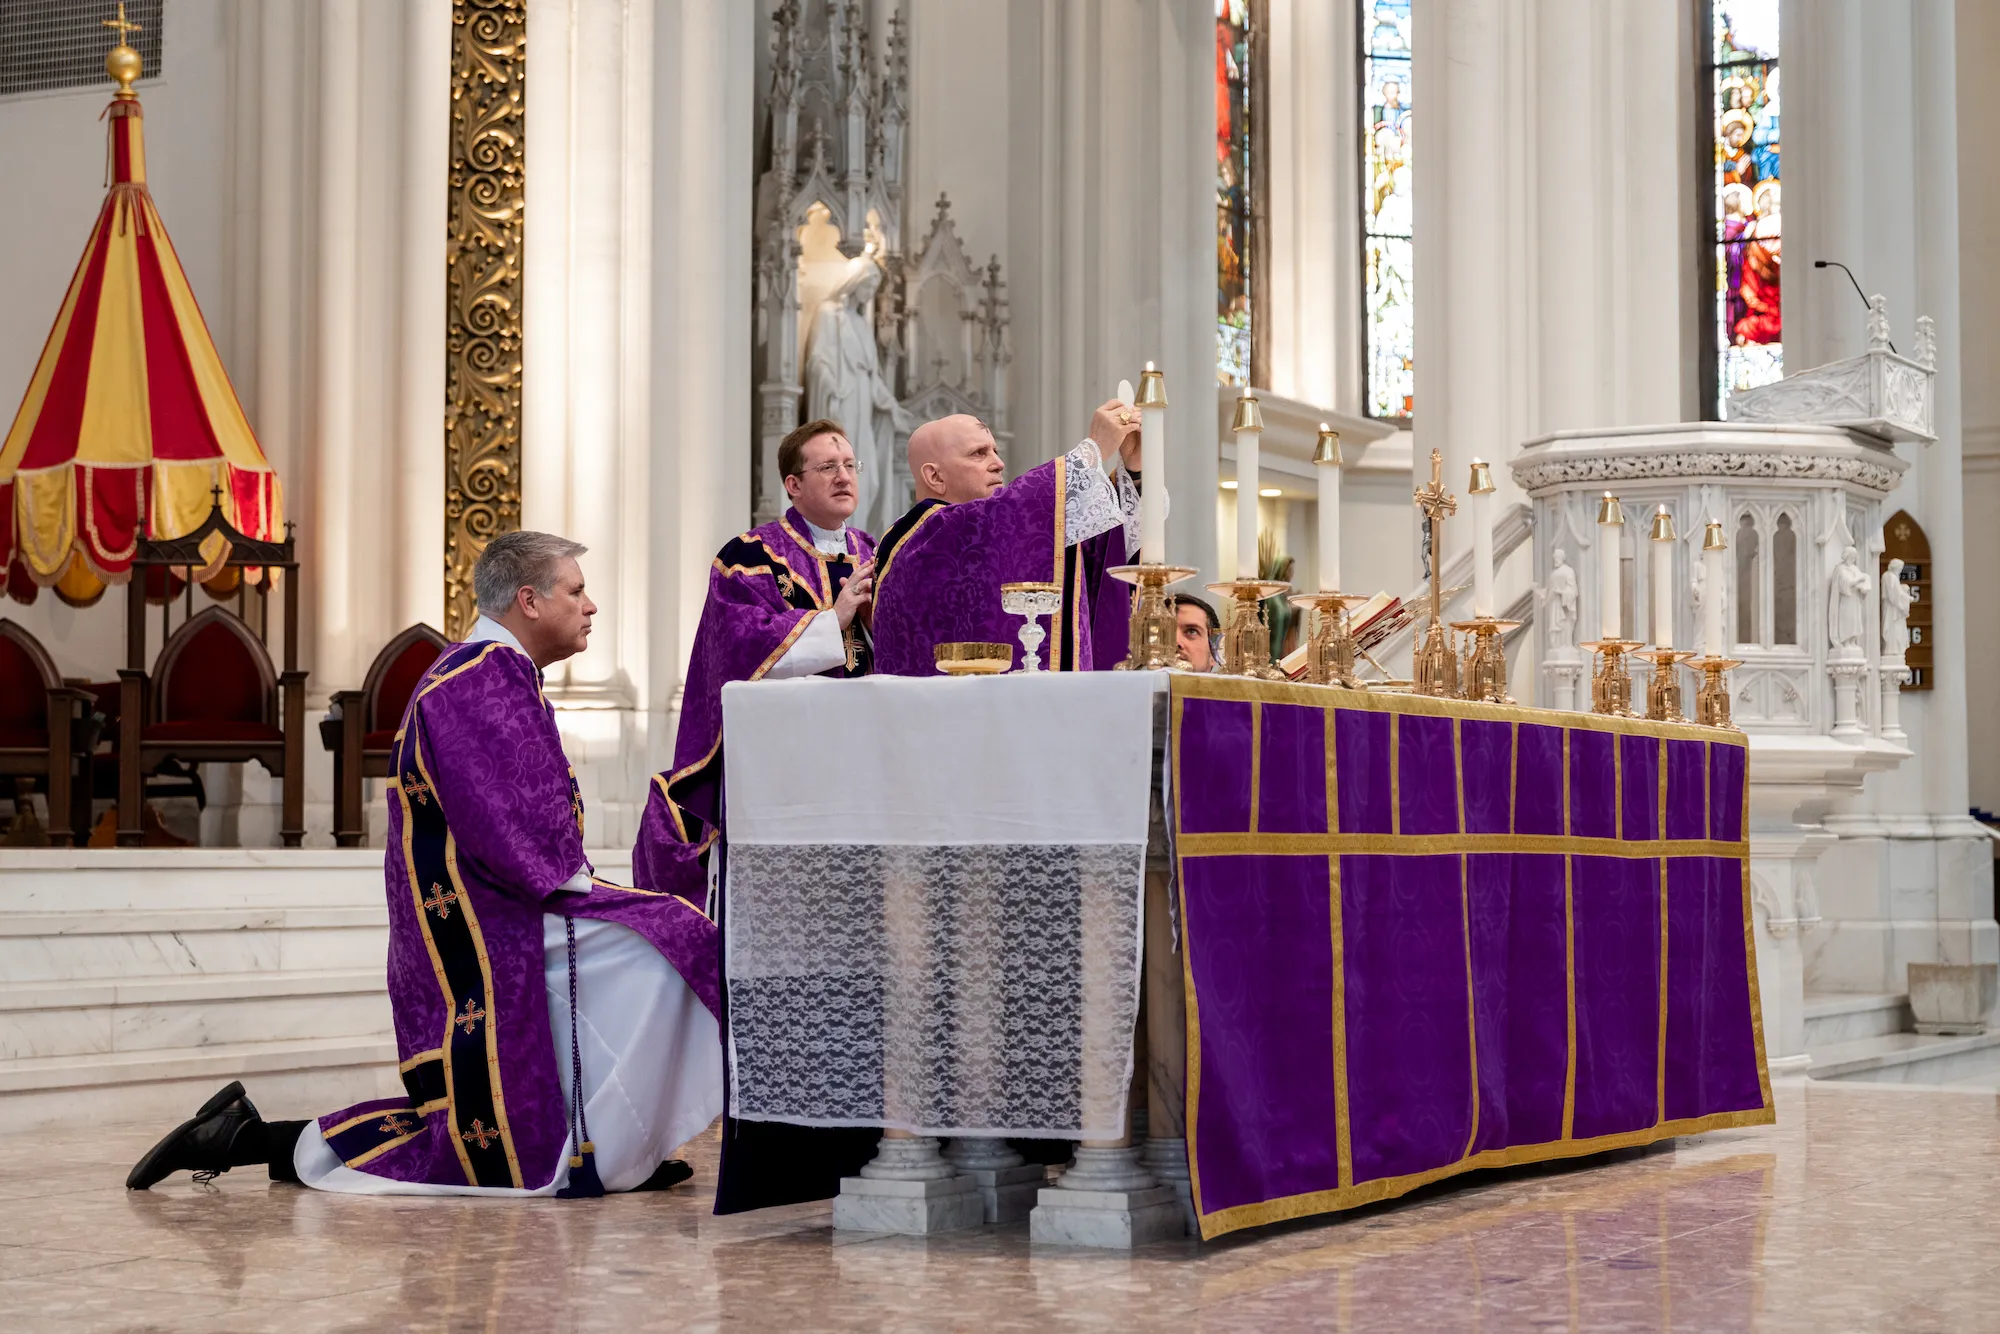 Archbishop Samuel Aquila of Denver offers Mass at the Cathedral Basilica of the Immaculate Conception on Ash Wednesday, Feb. 22, 2023.?w=200&h=150